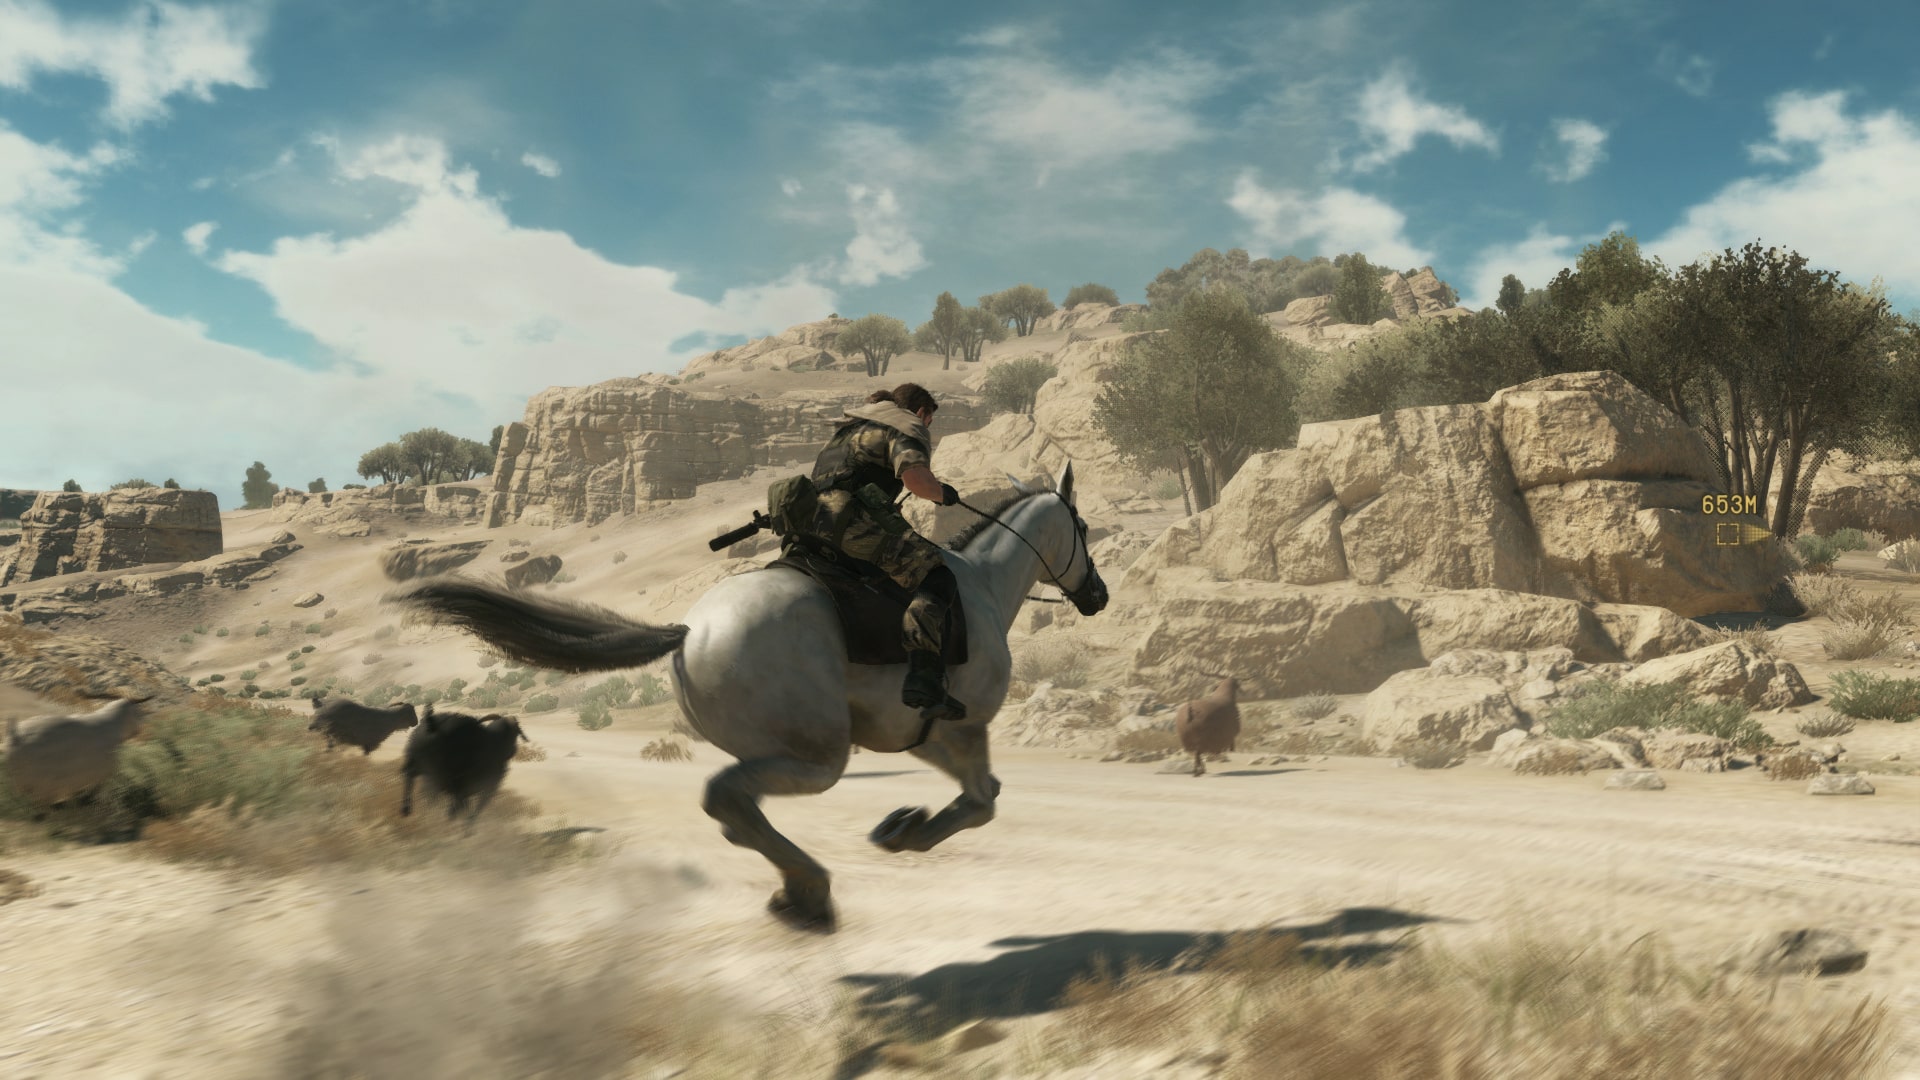 Metal Gear Solid 5: The Phantom Pain How To Get D-Horse